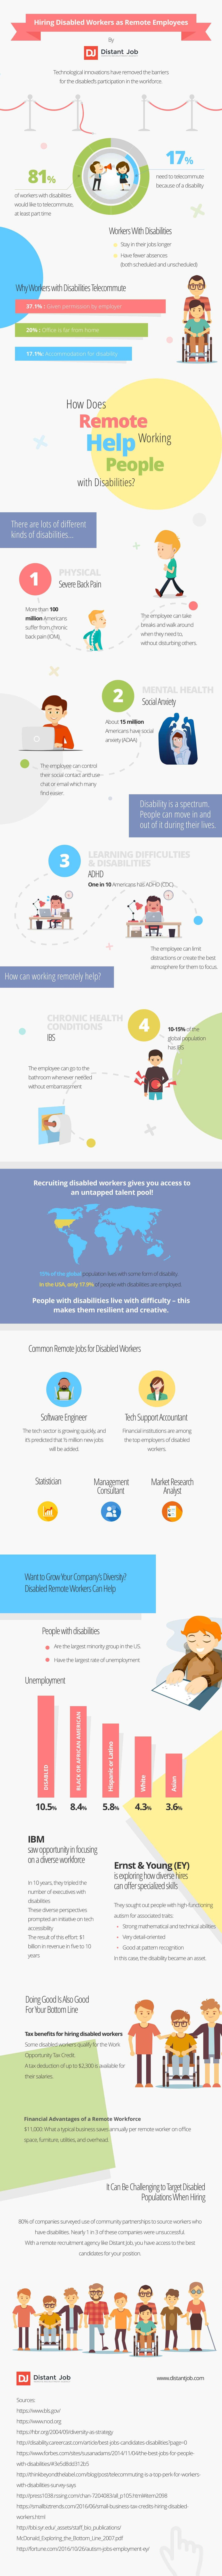 Infographic: Hiring Disabled Workers as Remote Employees